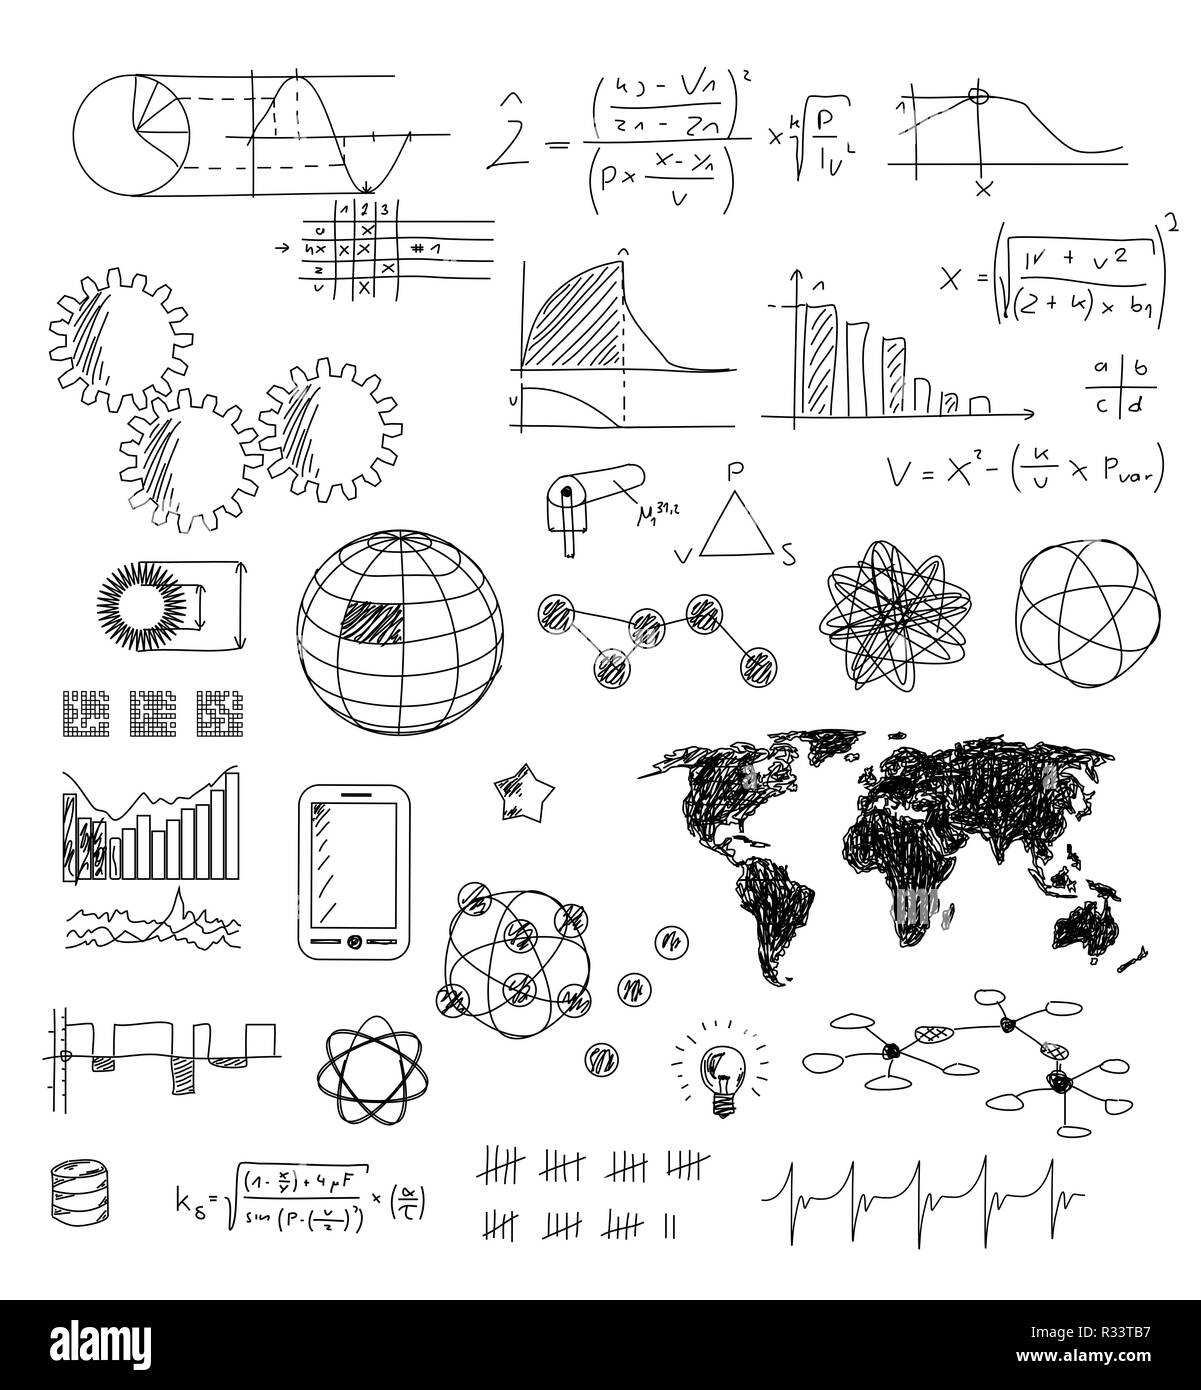 drawn elements - technology - ideas - solutions Stock Photo